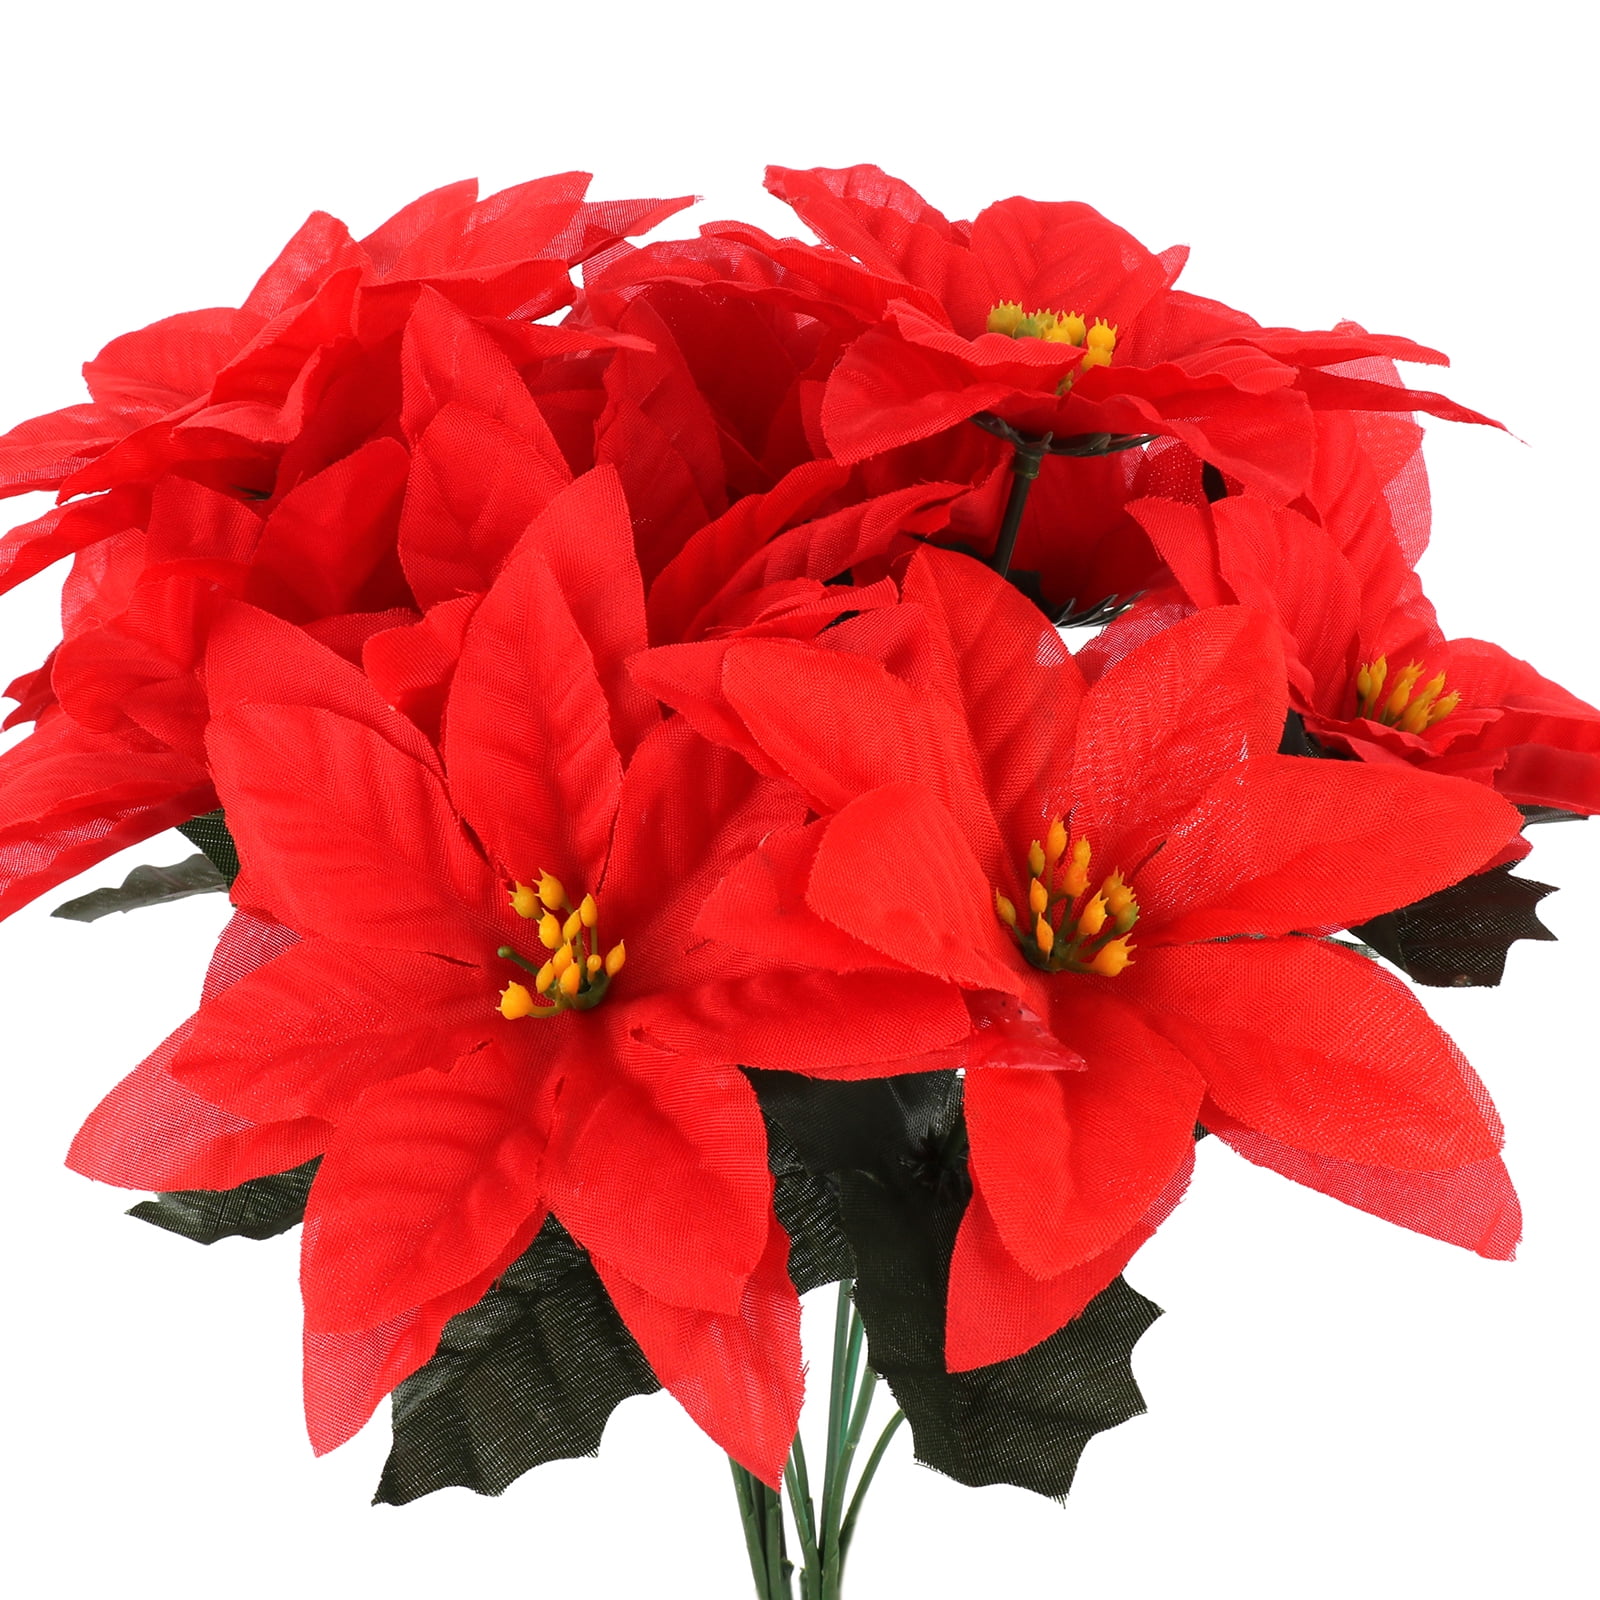 Microfiber 5-Red Poinsettia 20"Tall Bouquet Holidays Flower Home Office Decor 